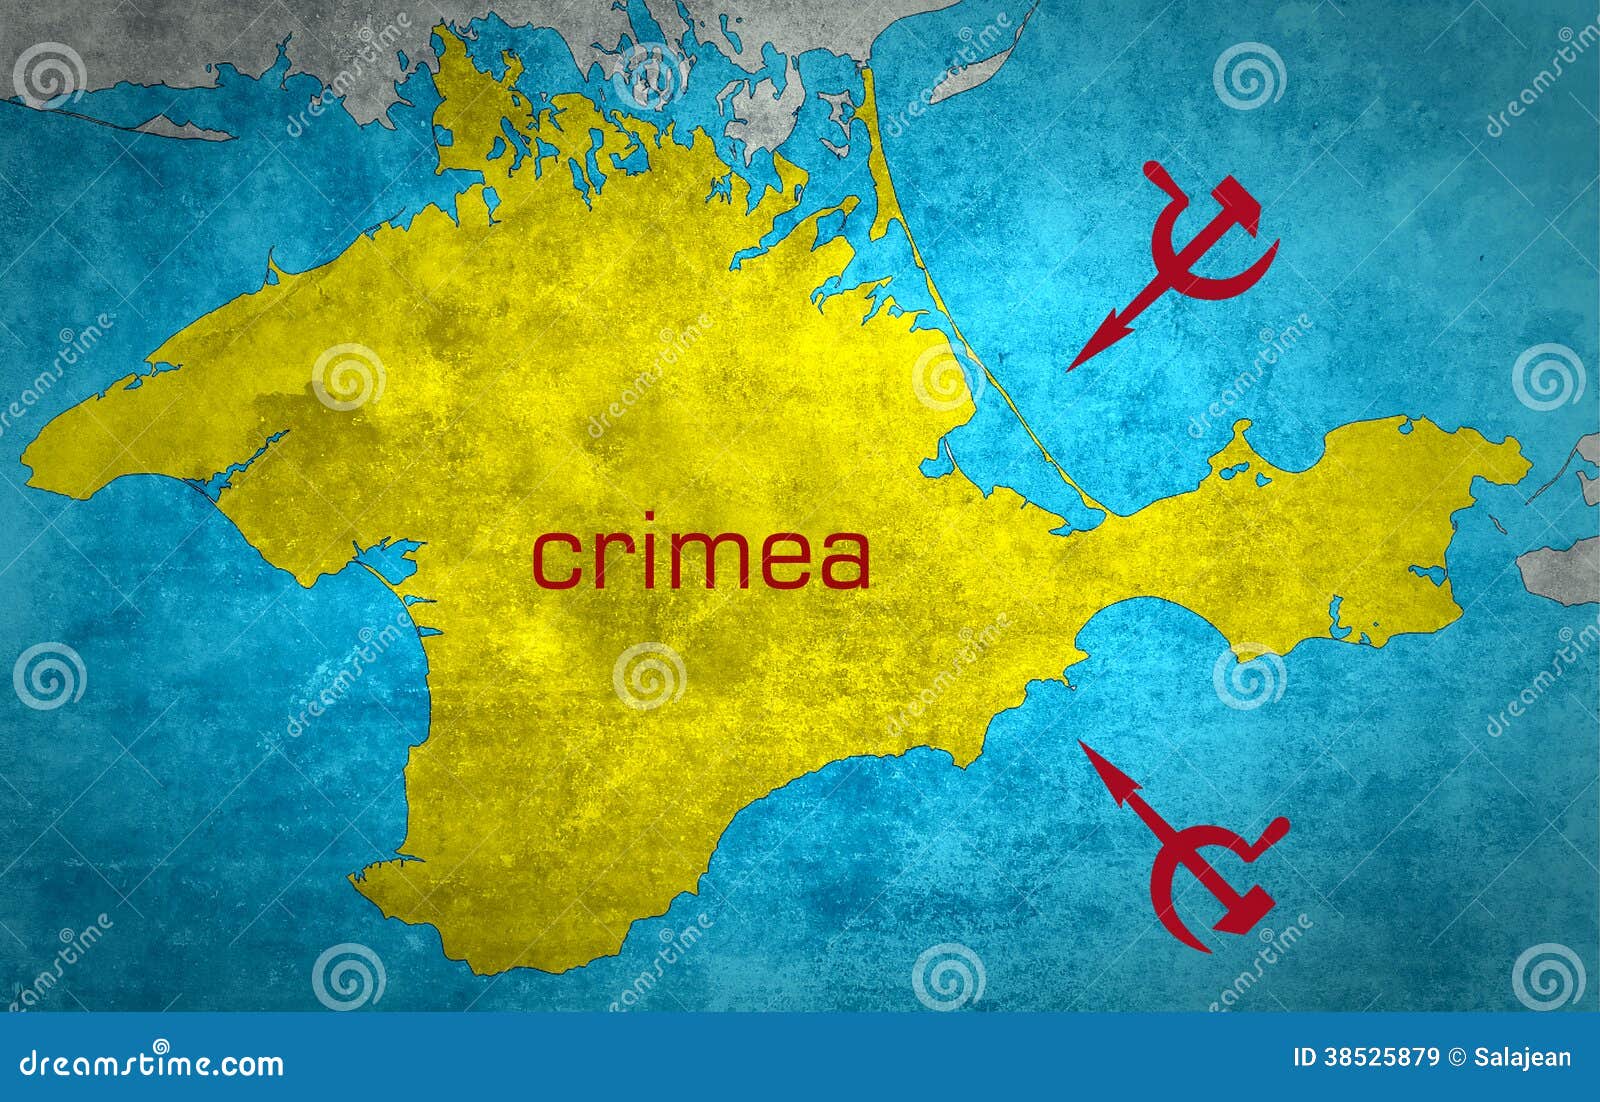 the map of crimea with the russian expansion